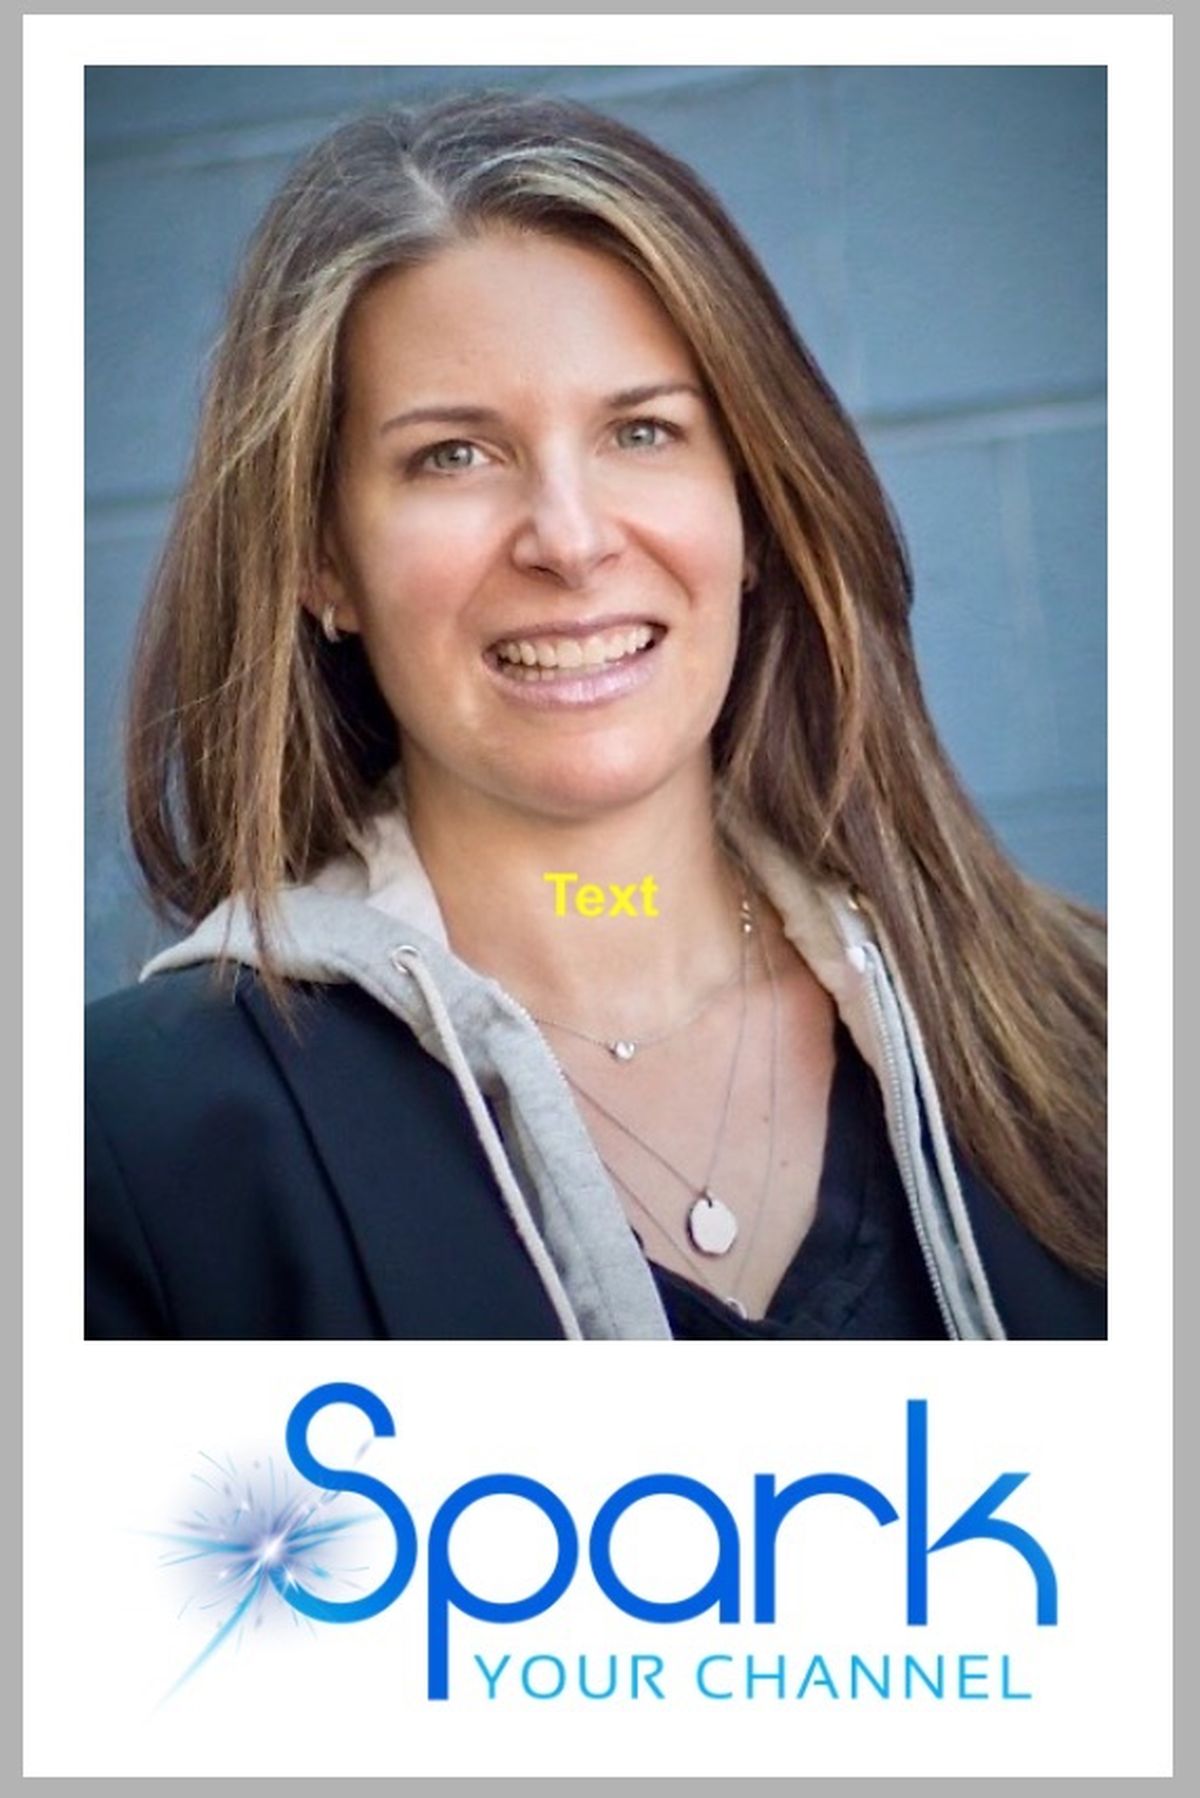 LinkedIn: Heather K. Margolis, founder and CEO, Spark Your Channel